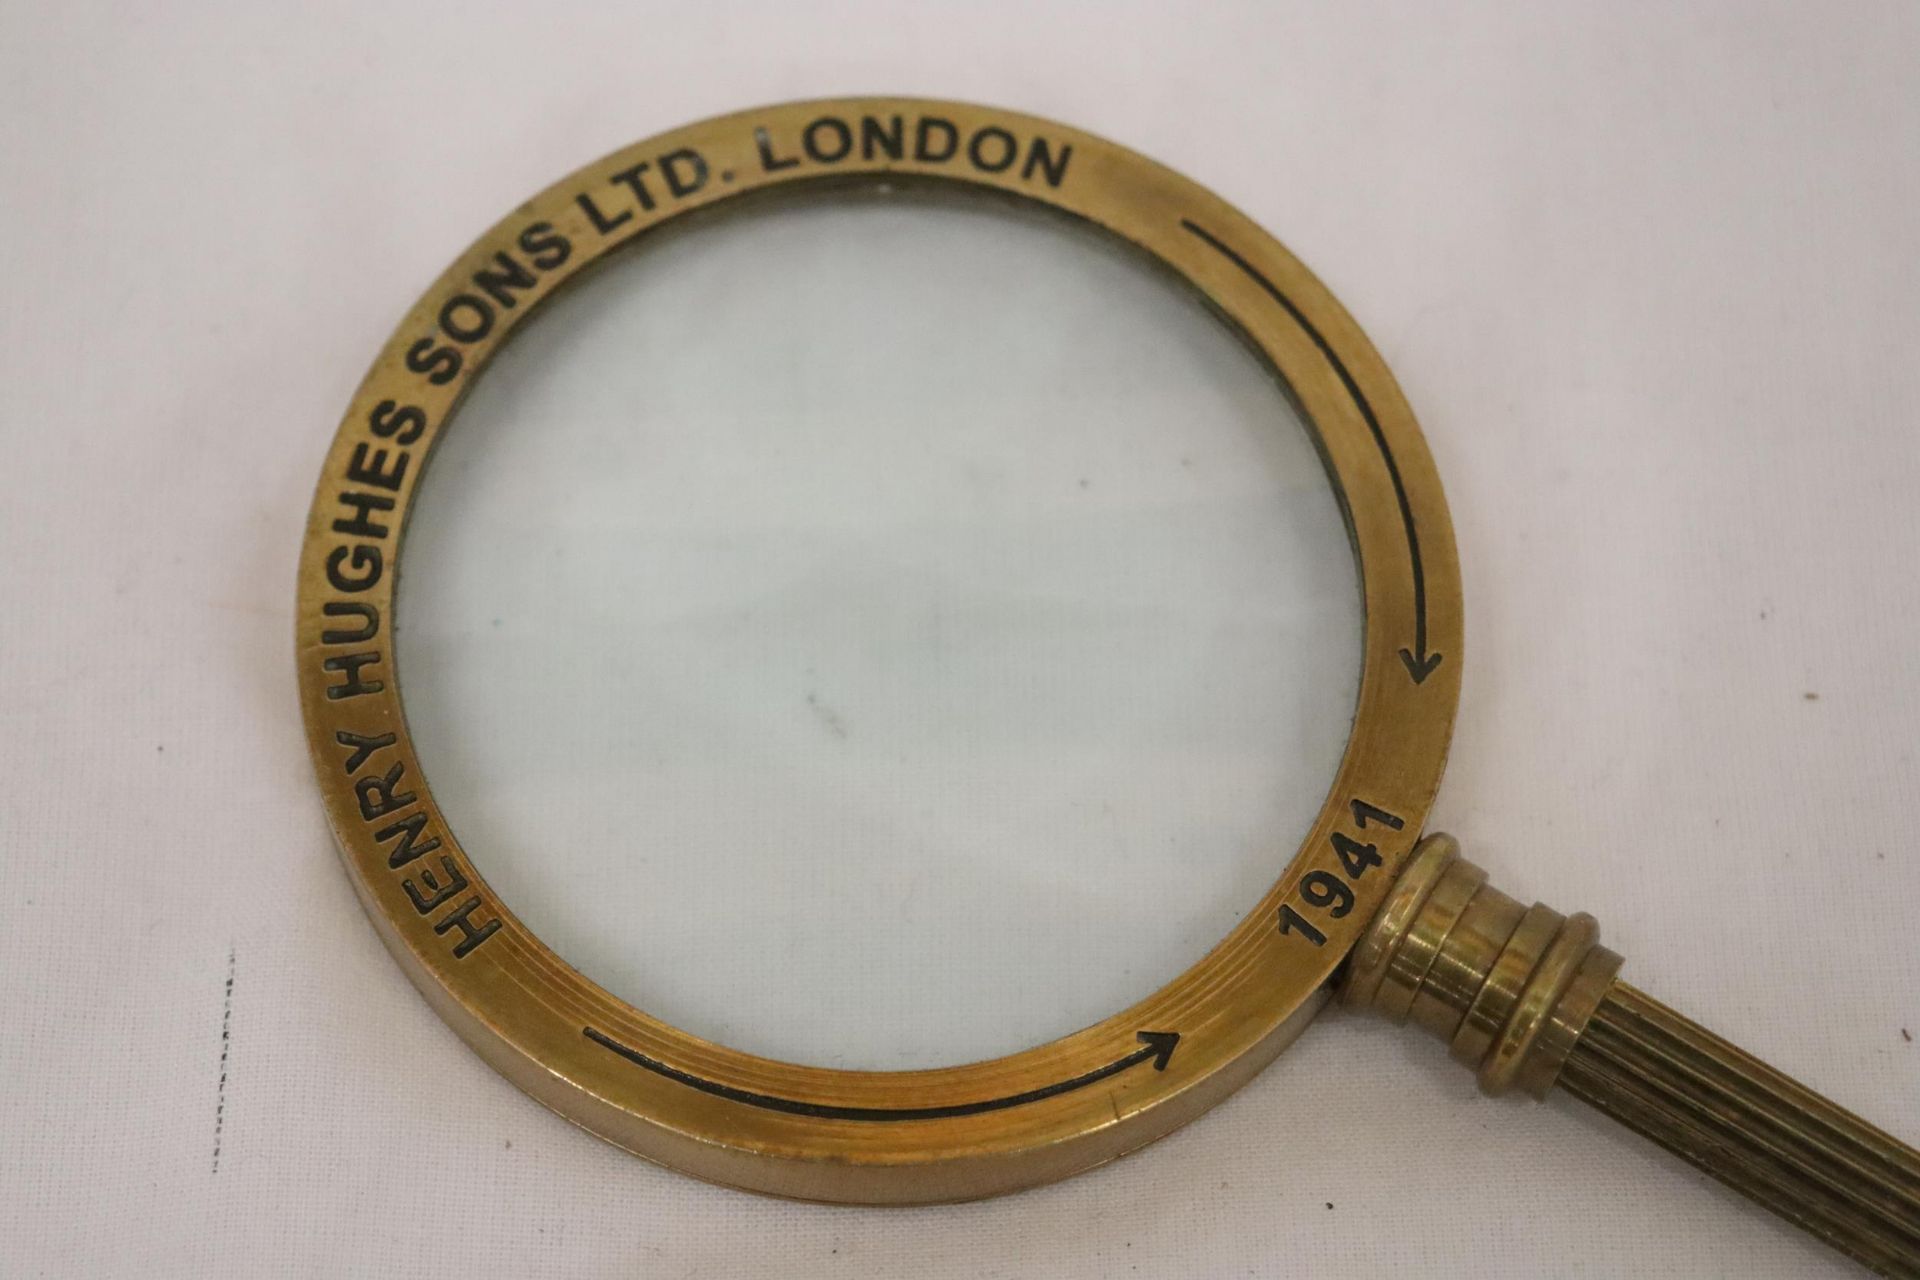 A HANDMADE VINTAGE ANTIQUE HENRY HUGHES & SONS OF LONDON 1941 BRASS MAGNIFYING GLASS - Image 4 of 5